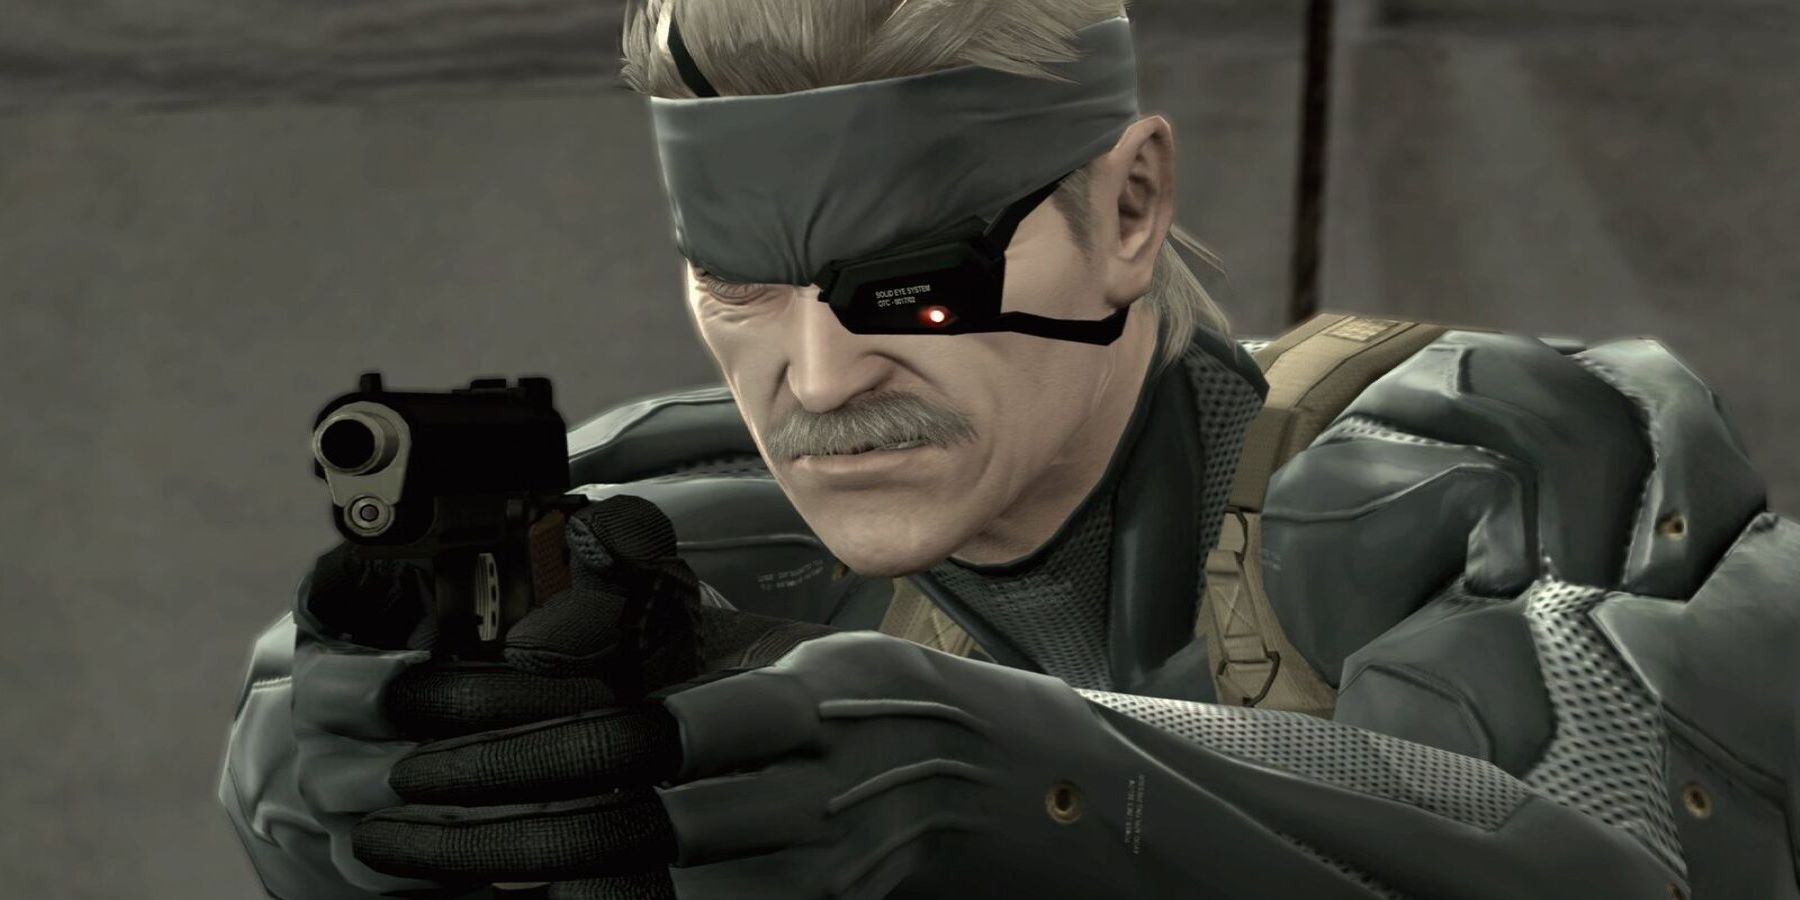 Metal Gear Solid 4 did not come to Xbox due to its lack of Blu-Ray disc  support